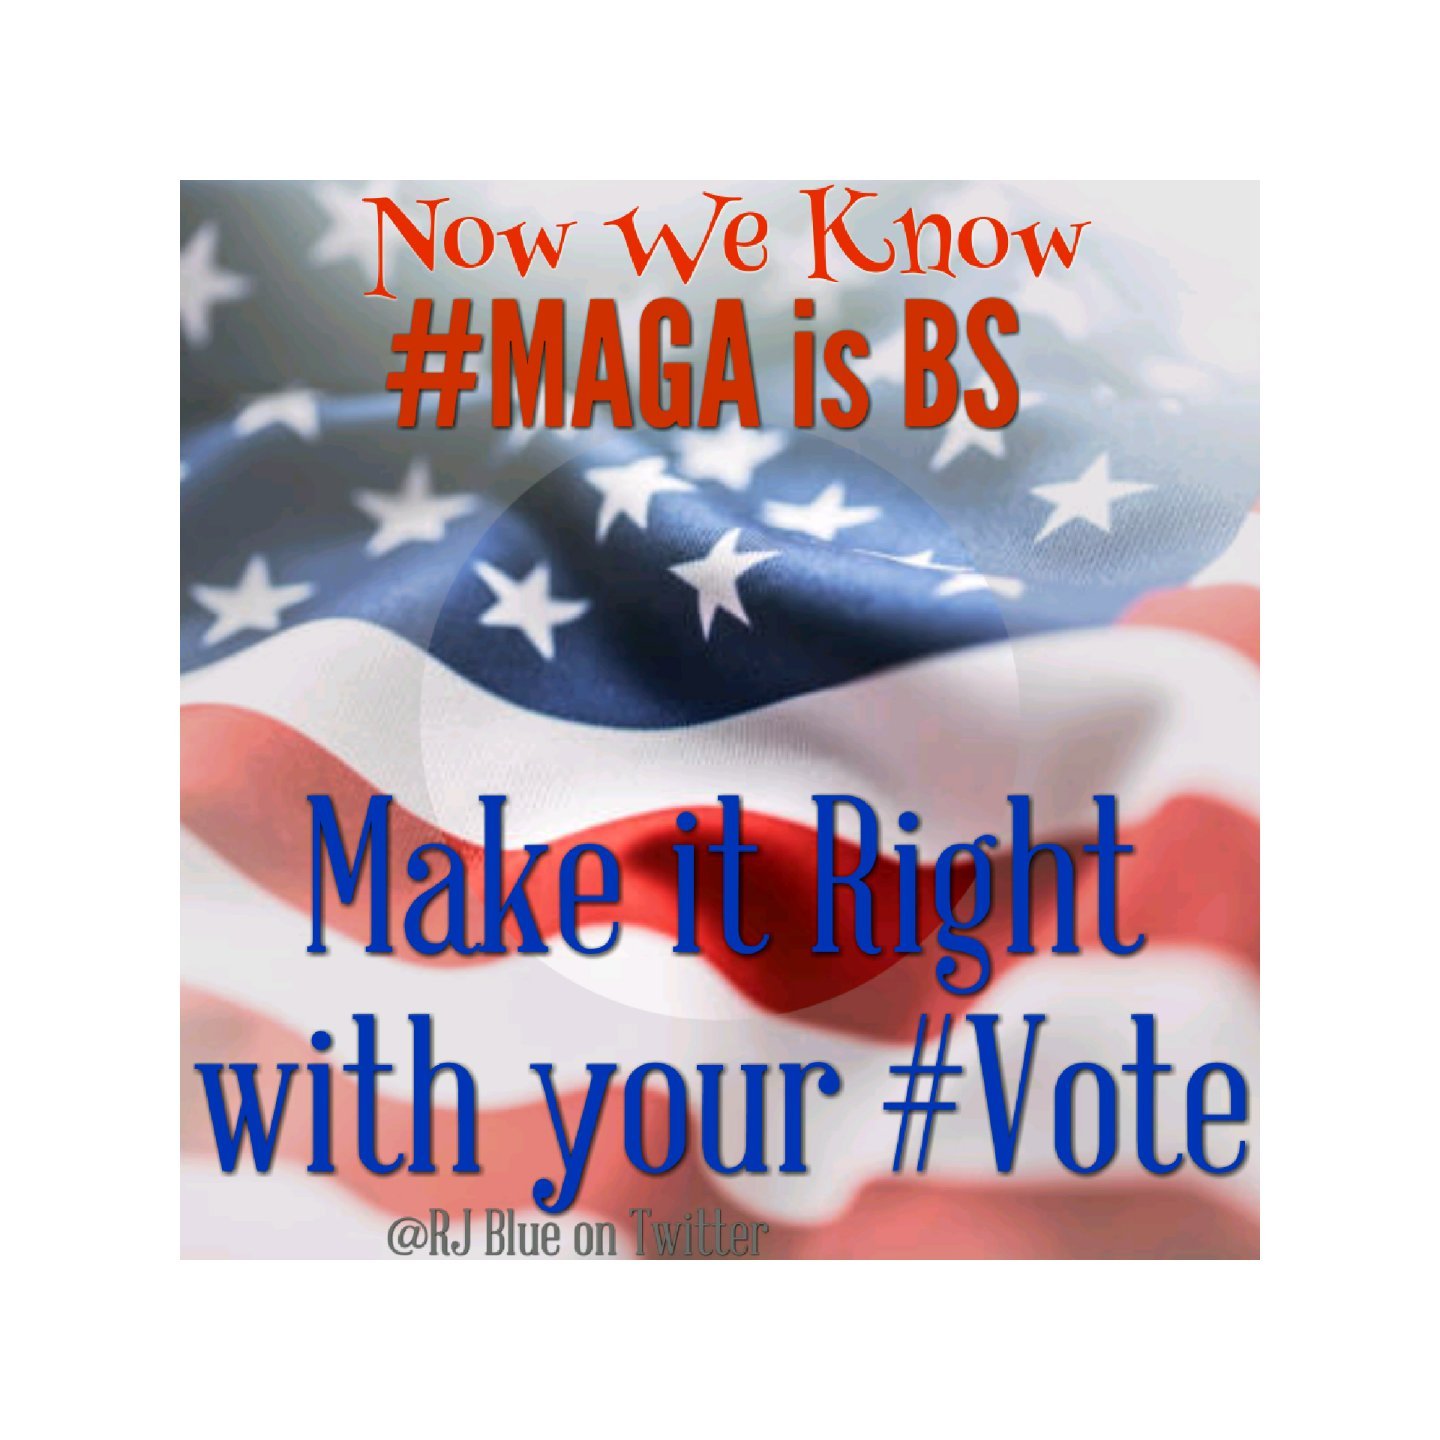 Tired of viral BS & out to make a change, like fighting Fake News & idiot Politicians who aren't representing its citizens. 
🚫info/pic=🚫Follow  #VoteBlue #FBR